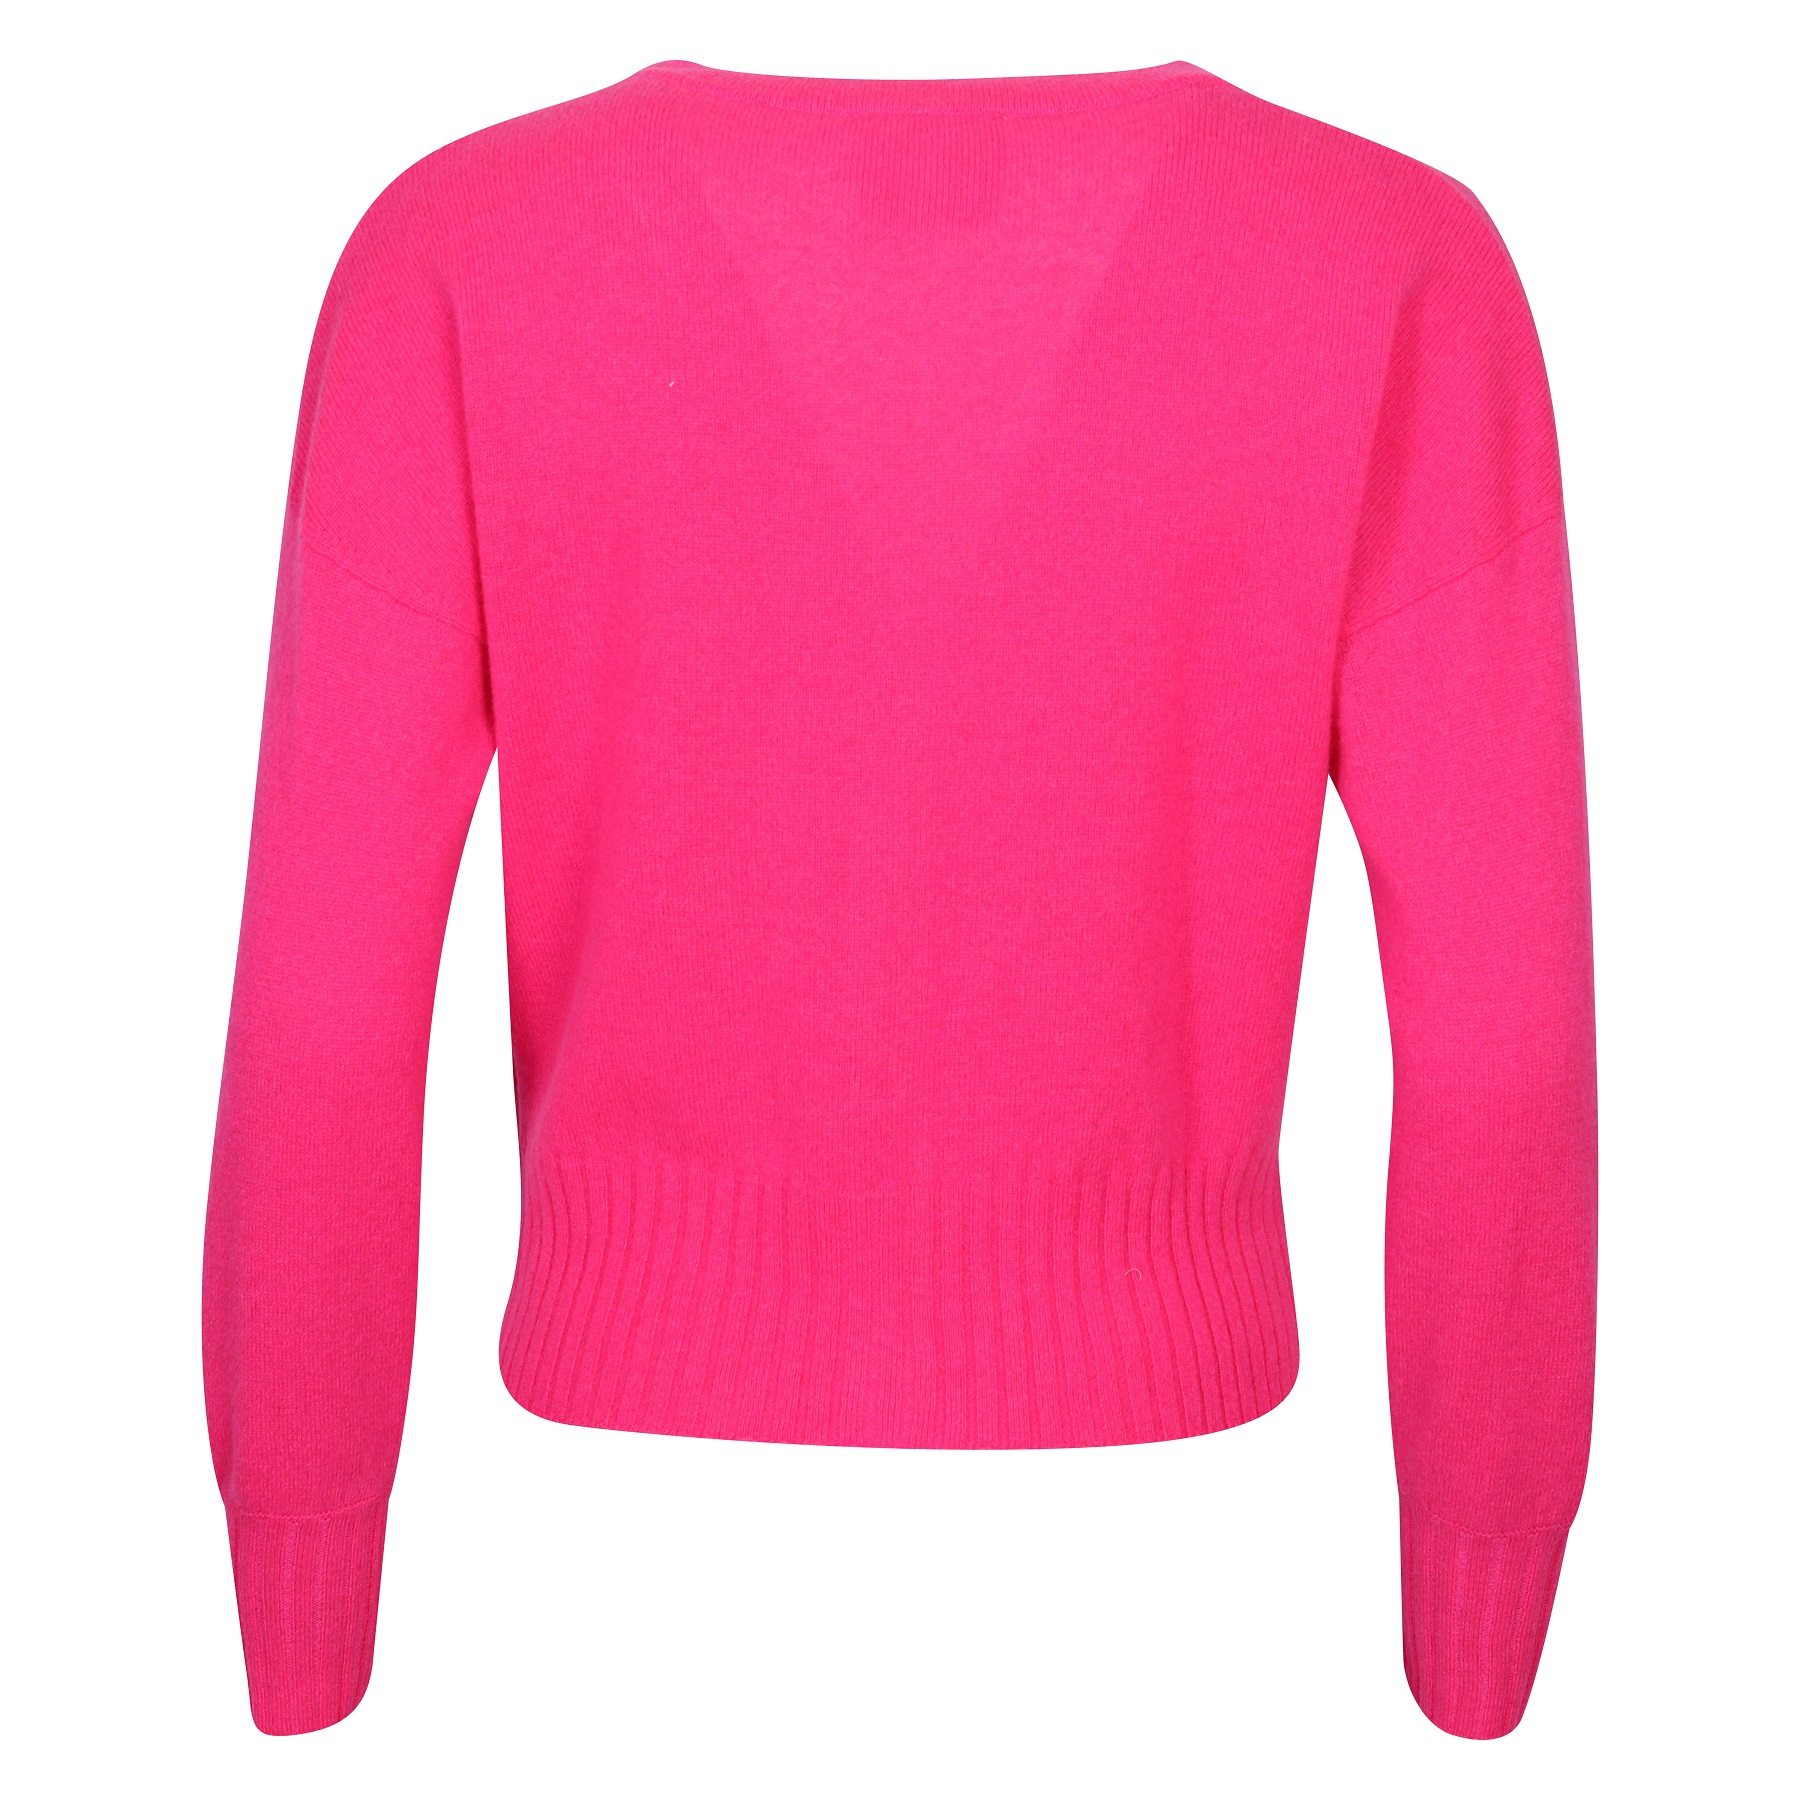 Absolut Cashmere Cardigan in Pink L